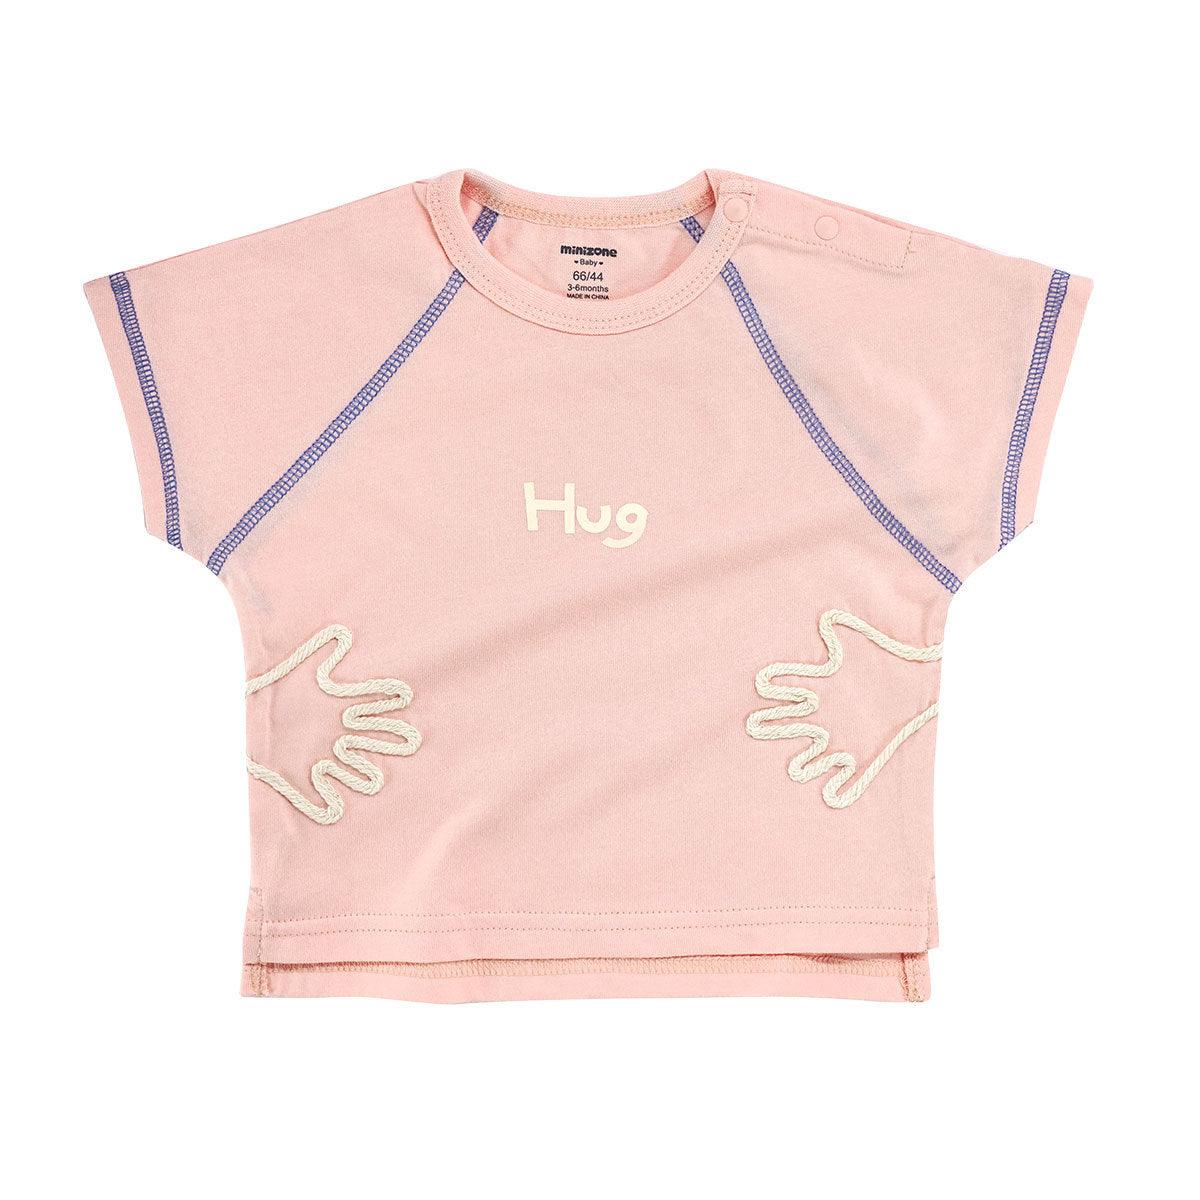 Summer New Short-sleeved Tops Children's Baby Comfortable T-shirt Fashion Children's Clothing - TOYCENT 